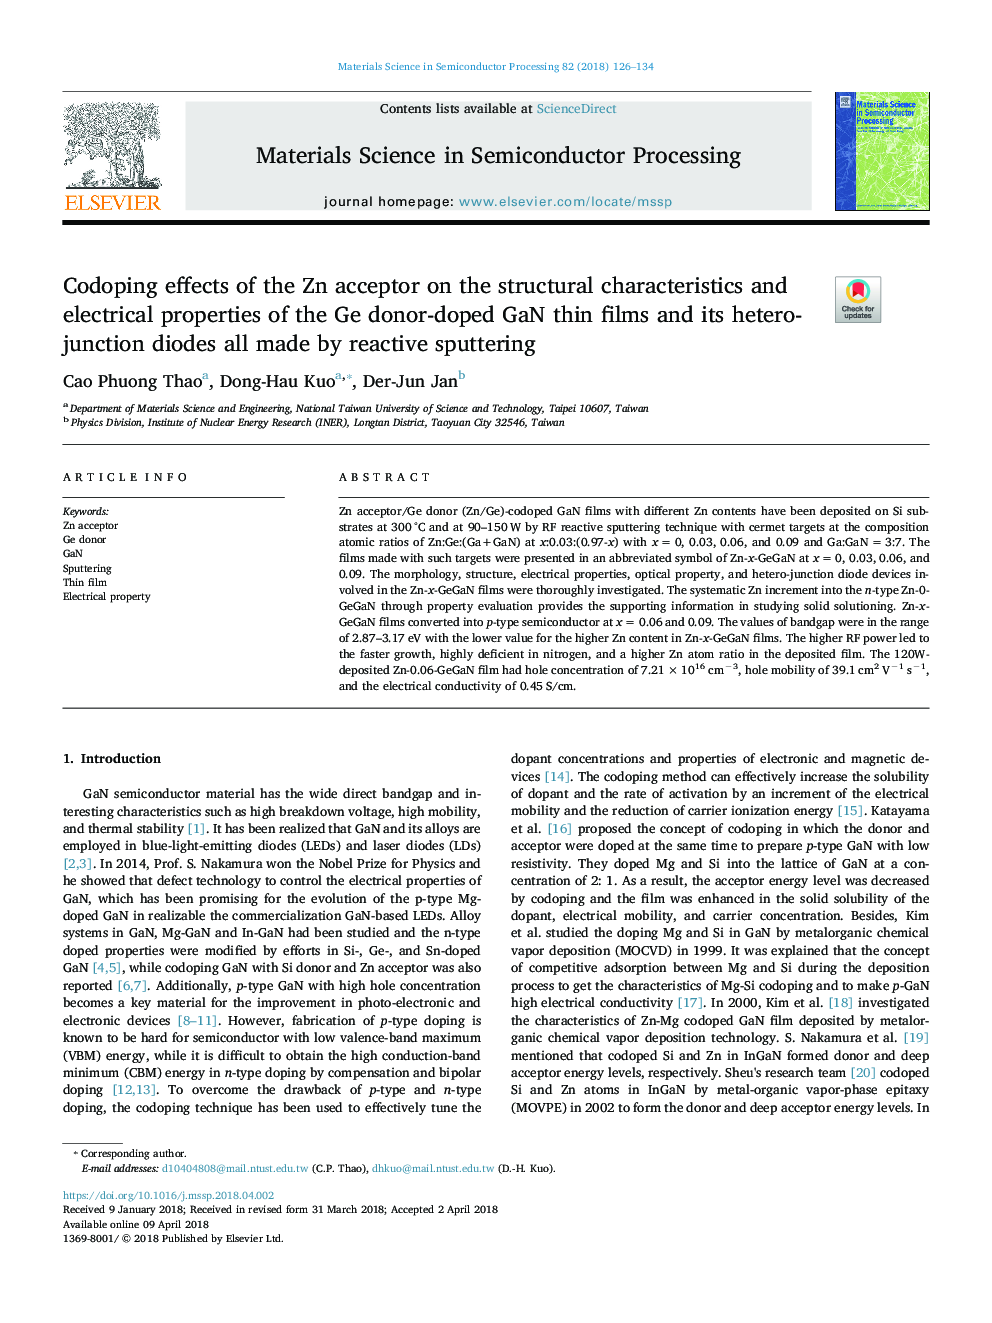 Codoping effects of the Zn acceptor on the structural characteristics and electrical properties of the Ge donor-doped GaN thin films and its hetero-junction diodes all made by reactive sputtering